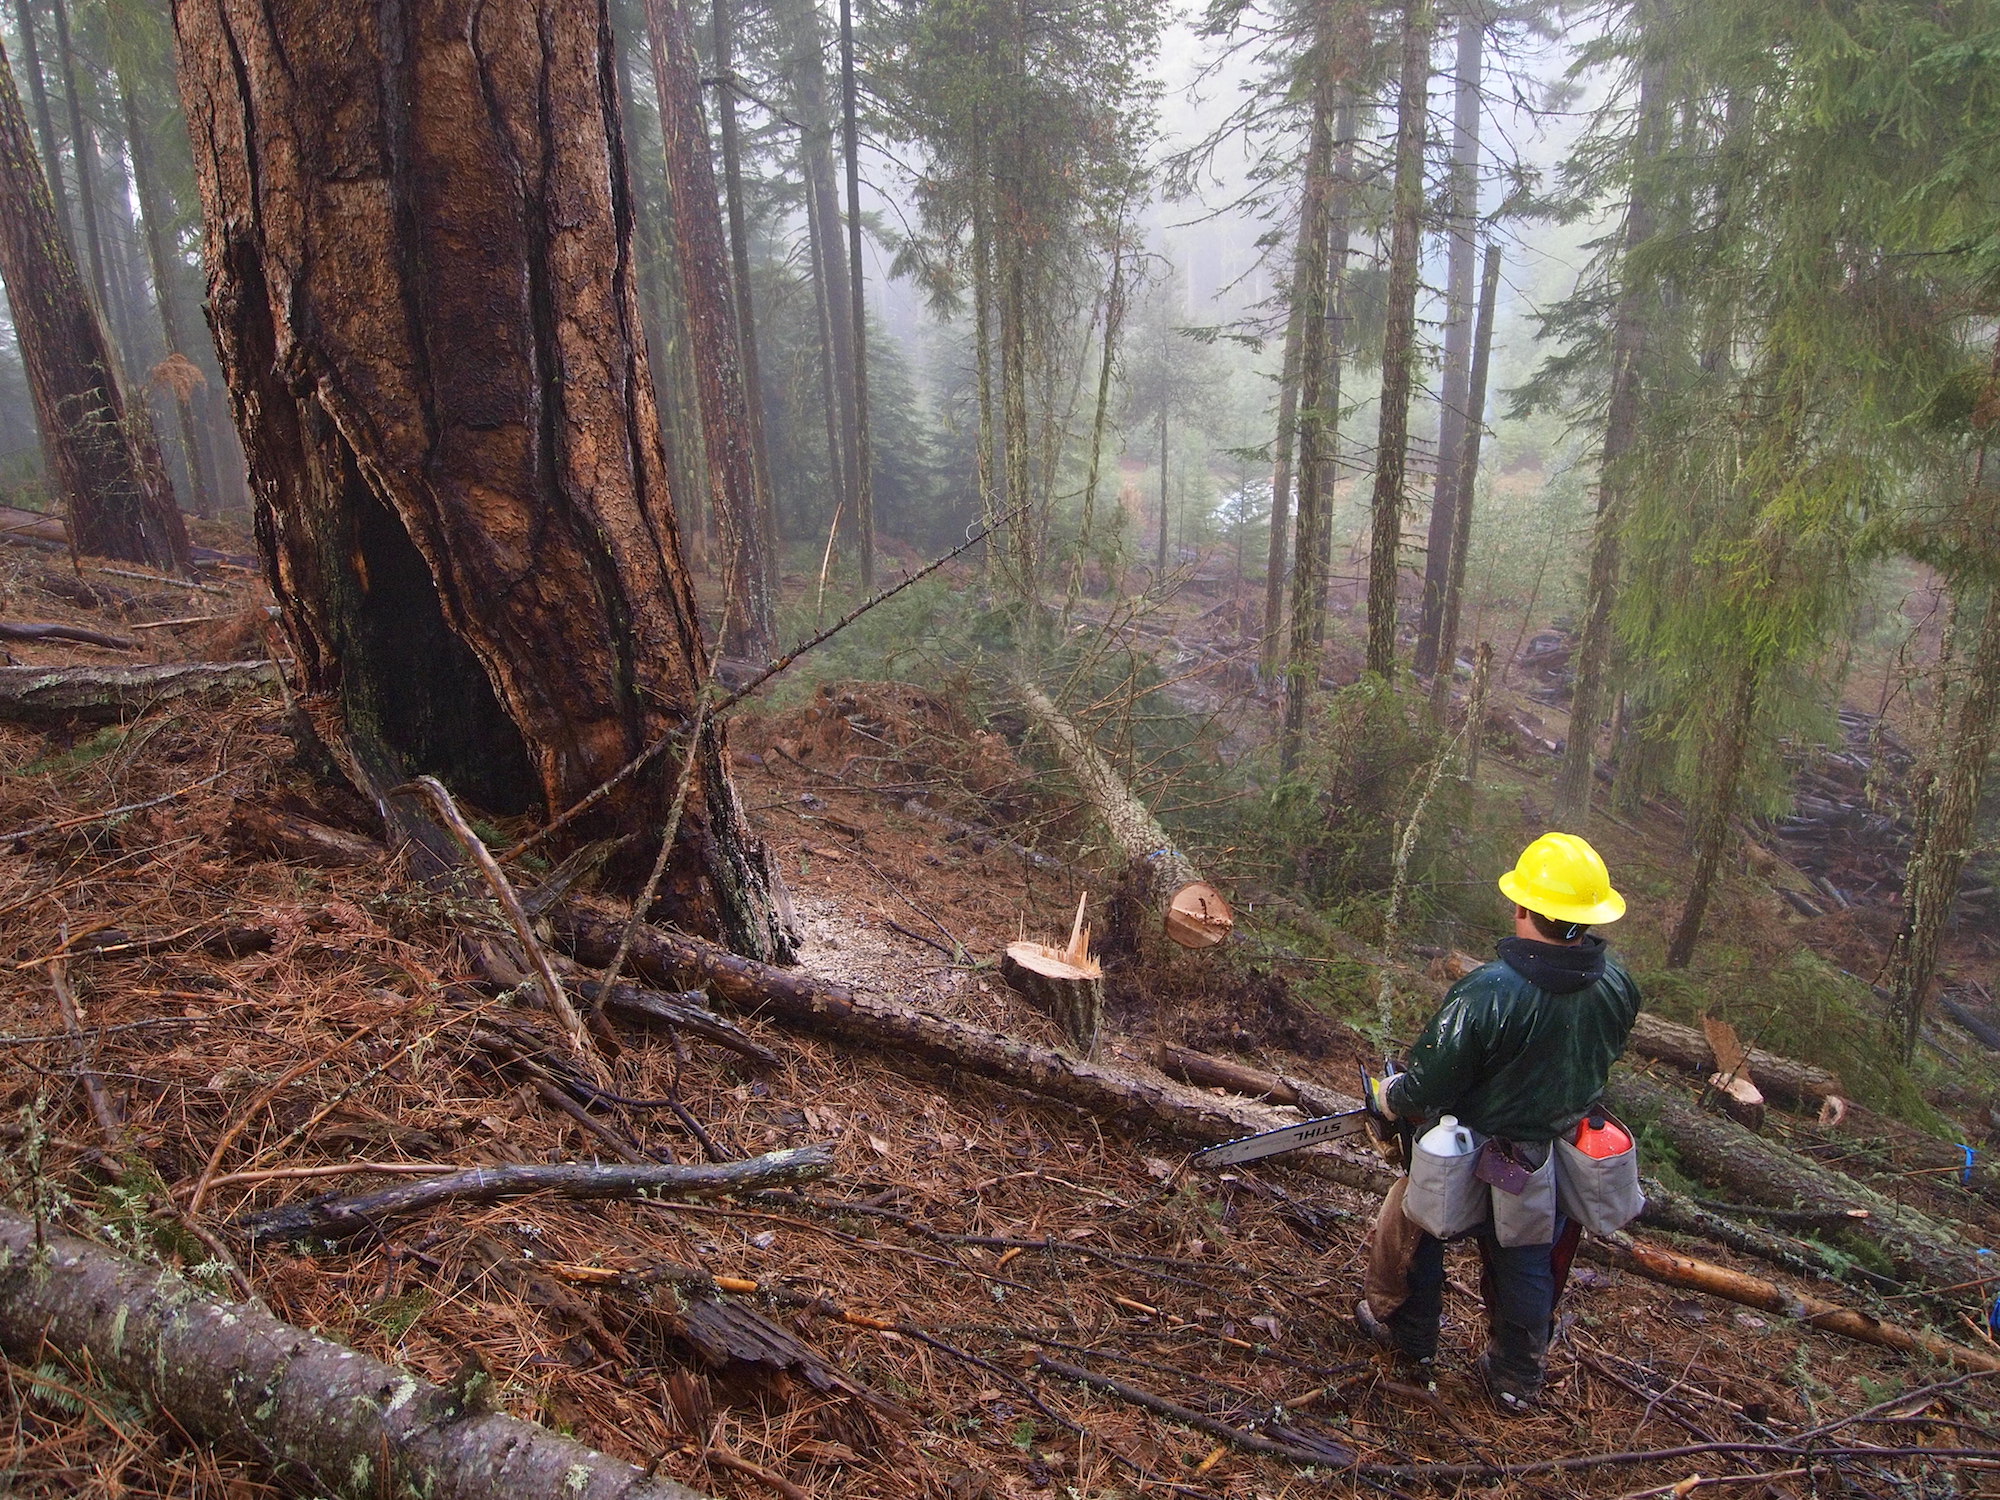 A worker cuts down a tree in a forest near Ashland, Oregon, as part of a larger wildfire prevention strategy.